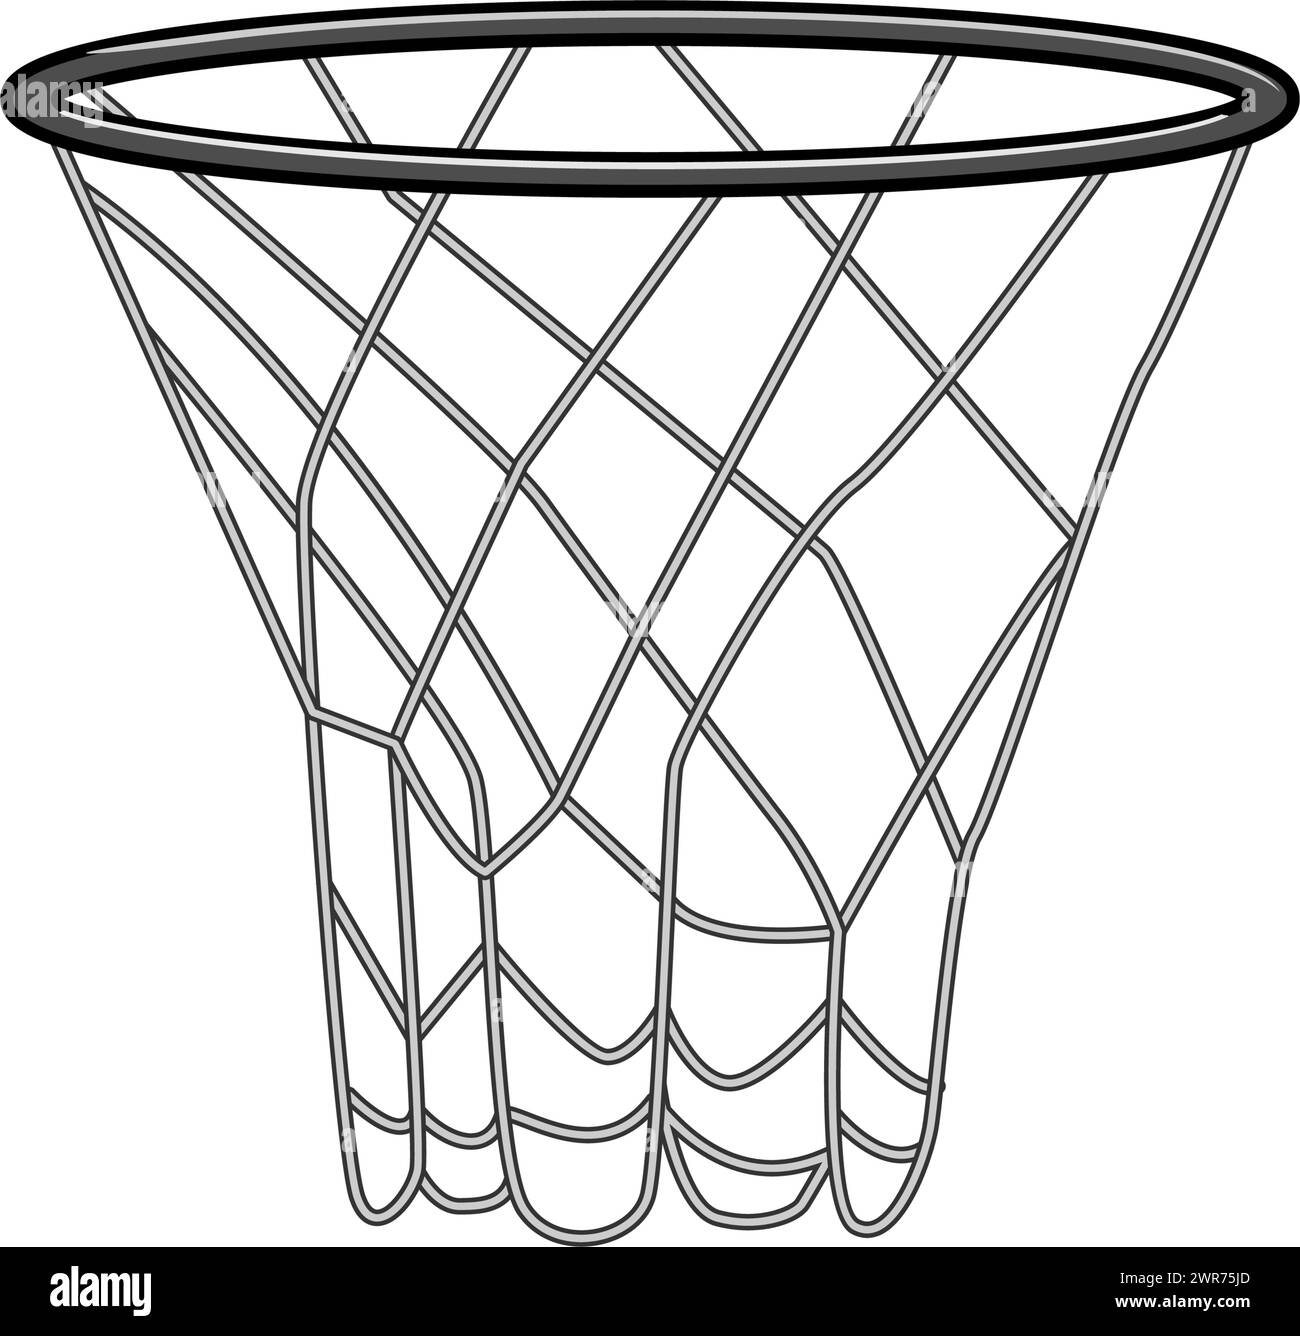 Basketball court empty Black and White Stock Photos & Images - Alamy